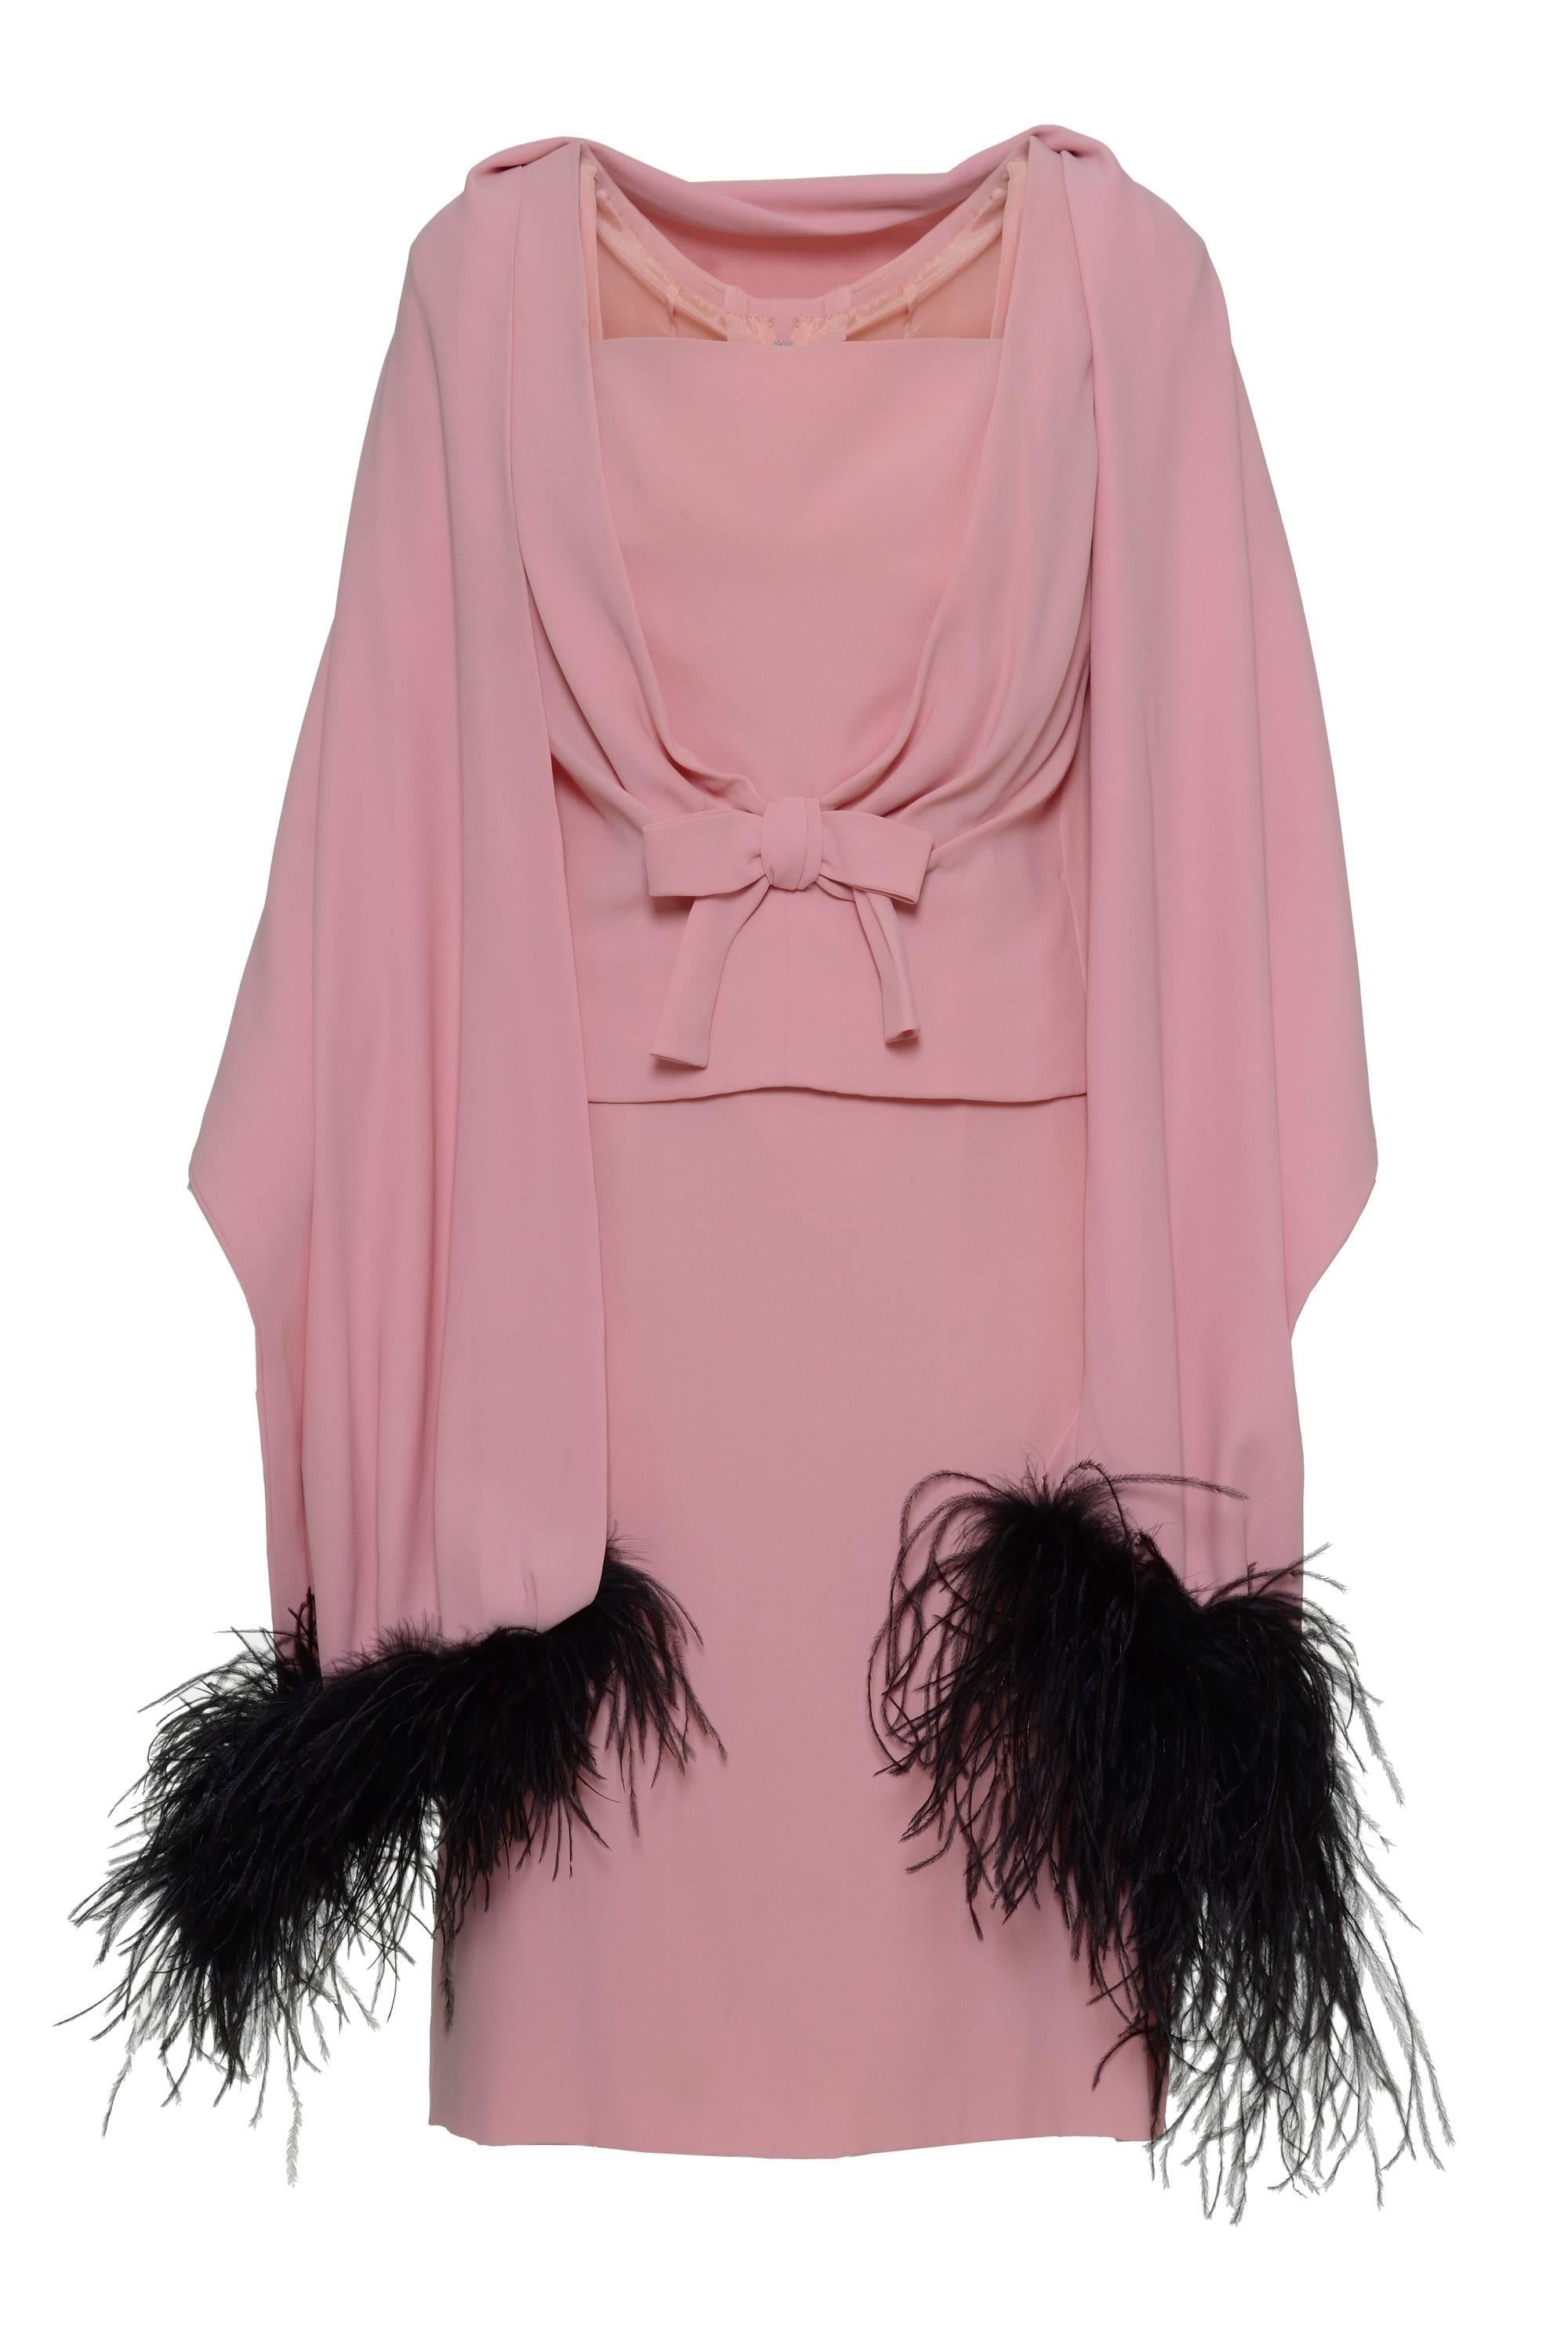 This 1960s pink cocktail dress has a back buttons closure on over-vest united with the skirt, two frontal darts, and a decorative bow on the same fabric. The stole has hems on black plumage.

Good vintage condition.

Color: Rose
Fabric: